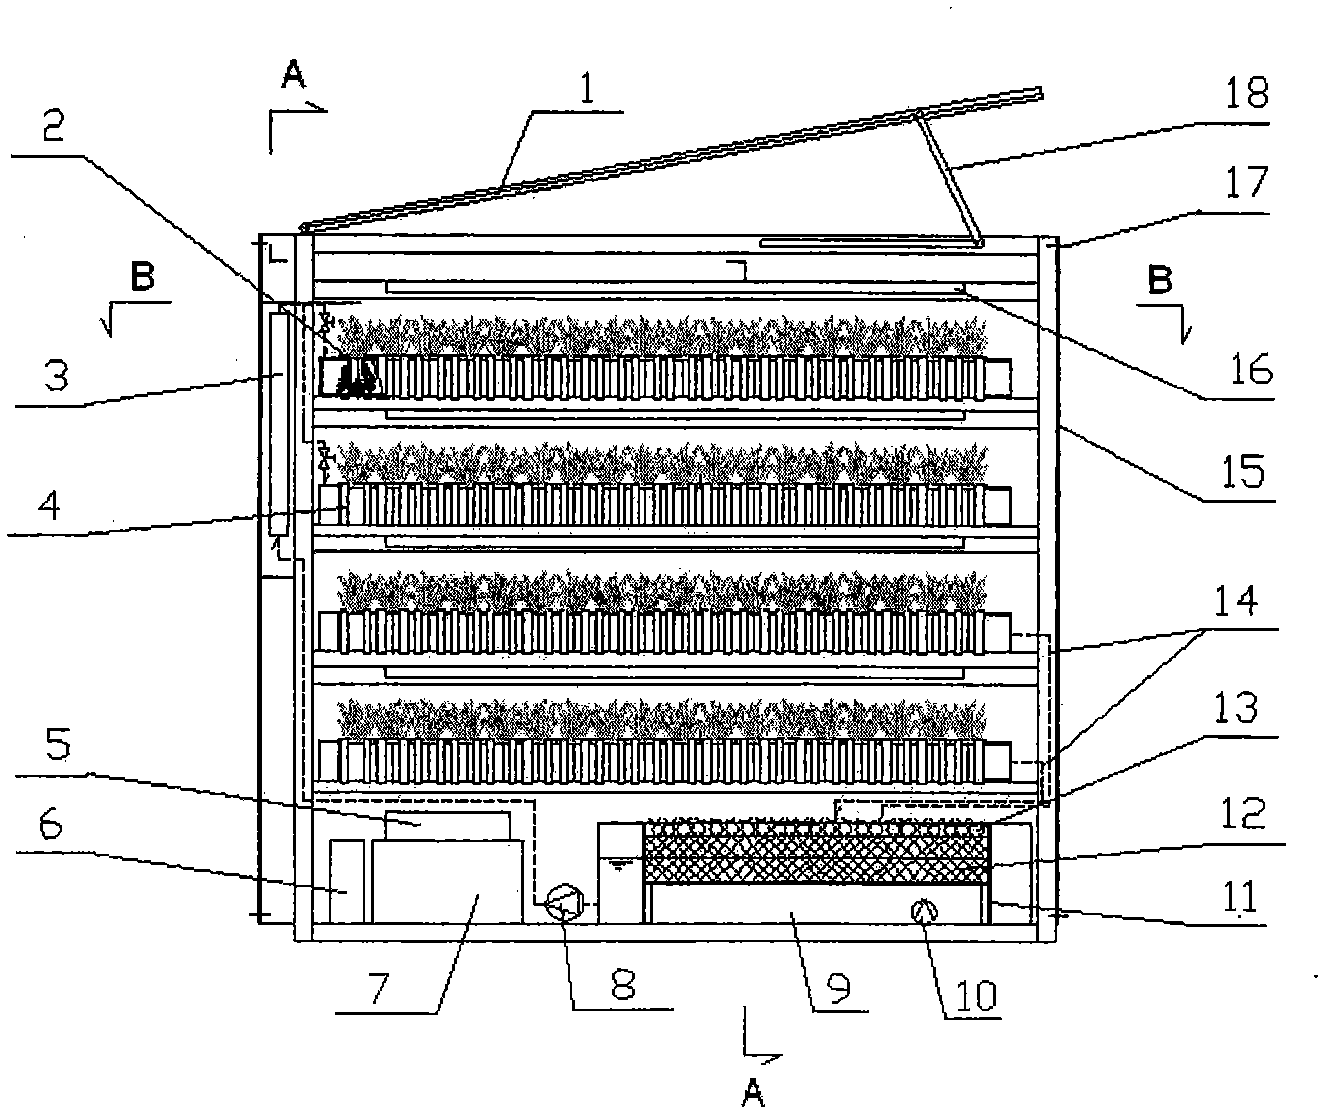 Vegetable cultivation device capable of utilizing natural light source and being detached and assembled